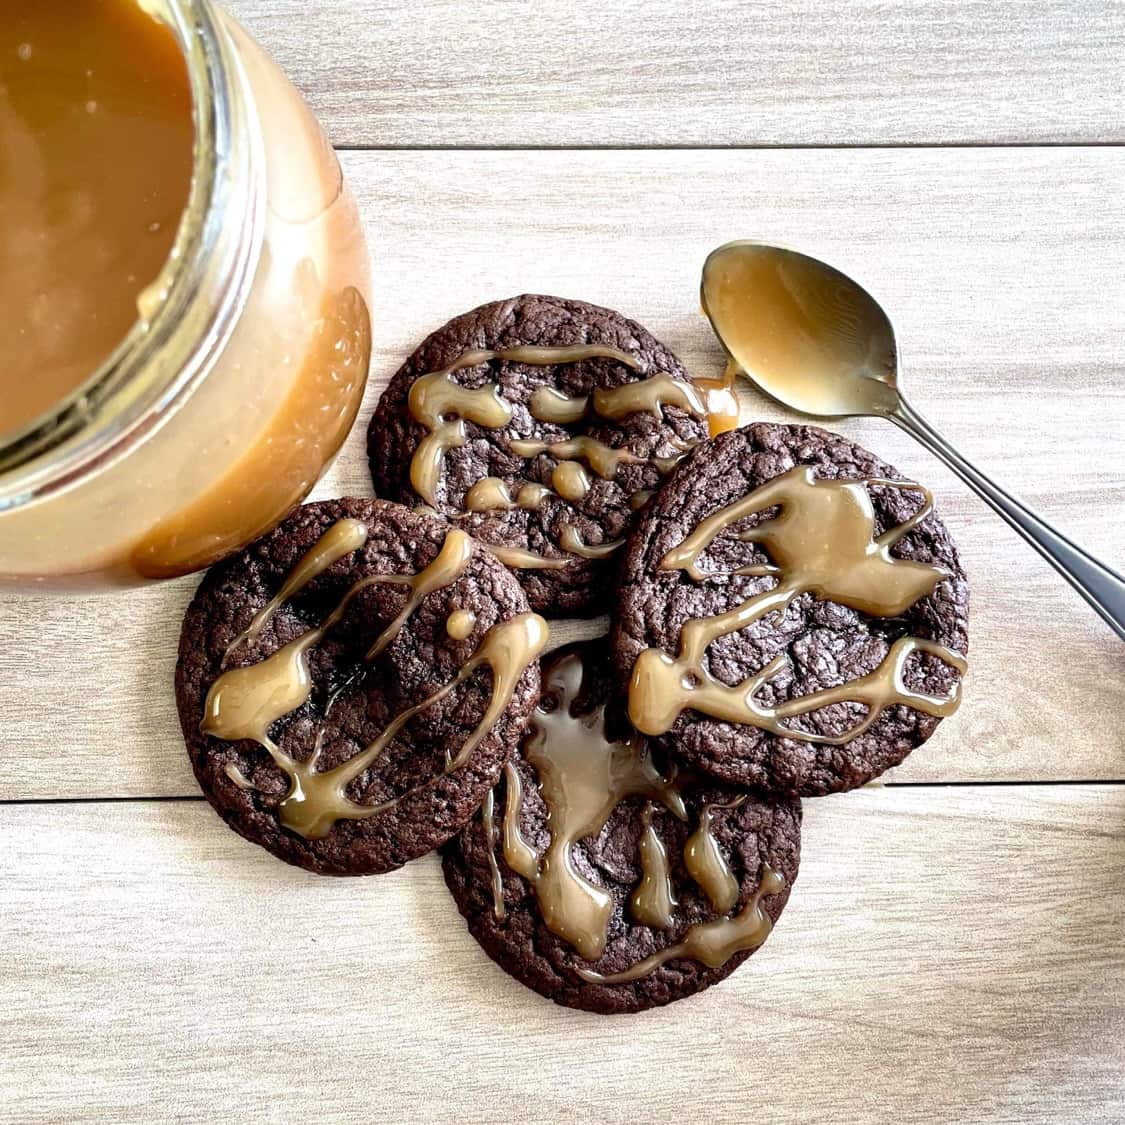 Four chocolate cookies drizzled with caramel sauce, next to a jar of caramel and a caramel covered spoon.